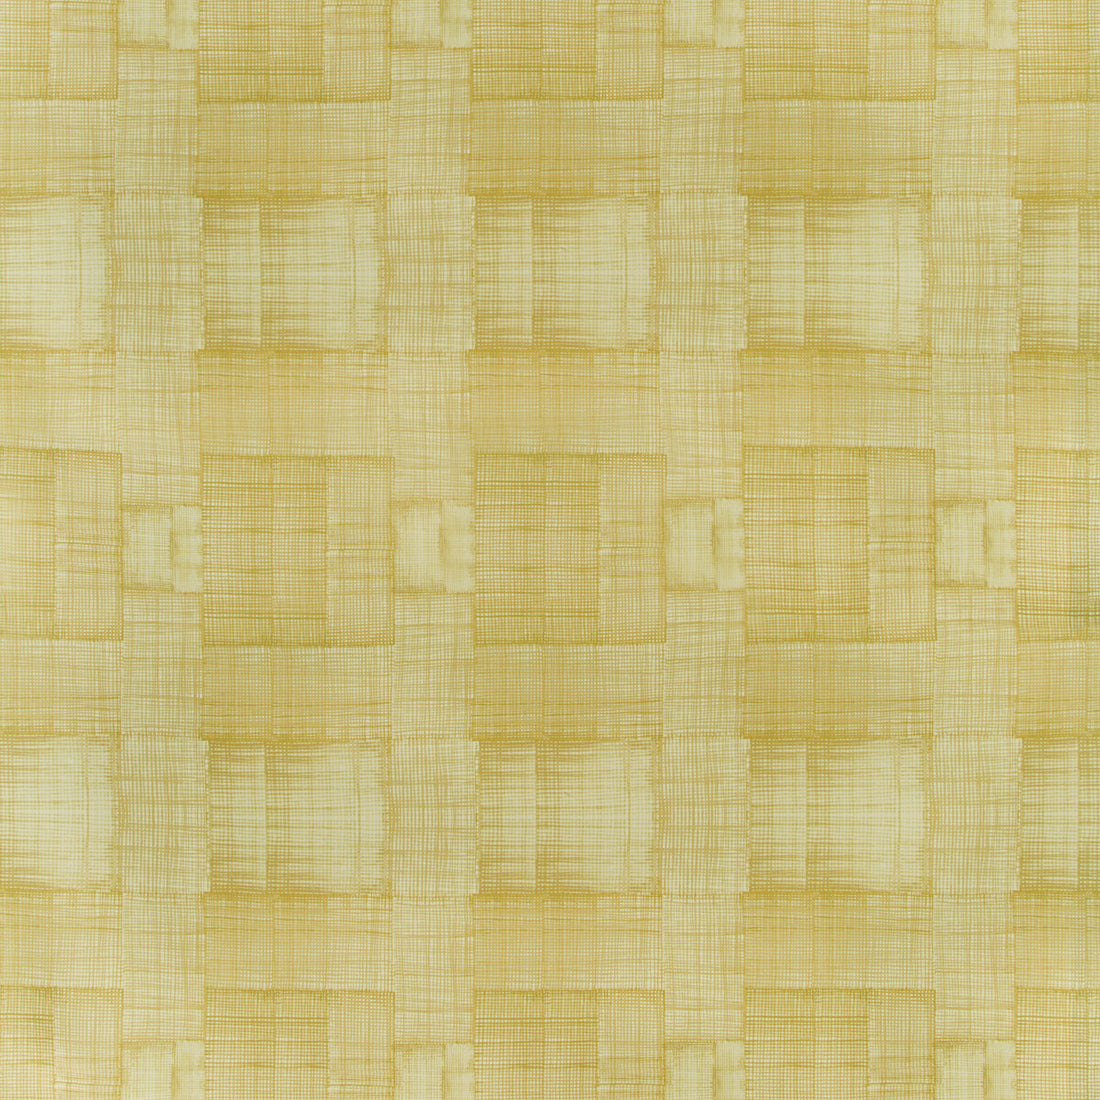 Sieve fabric in sunkissed color - pattern 2019147.164.0 - by Lee Jofa Modern in the Kw Terra Firma III Indoor Outdoor collection